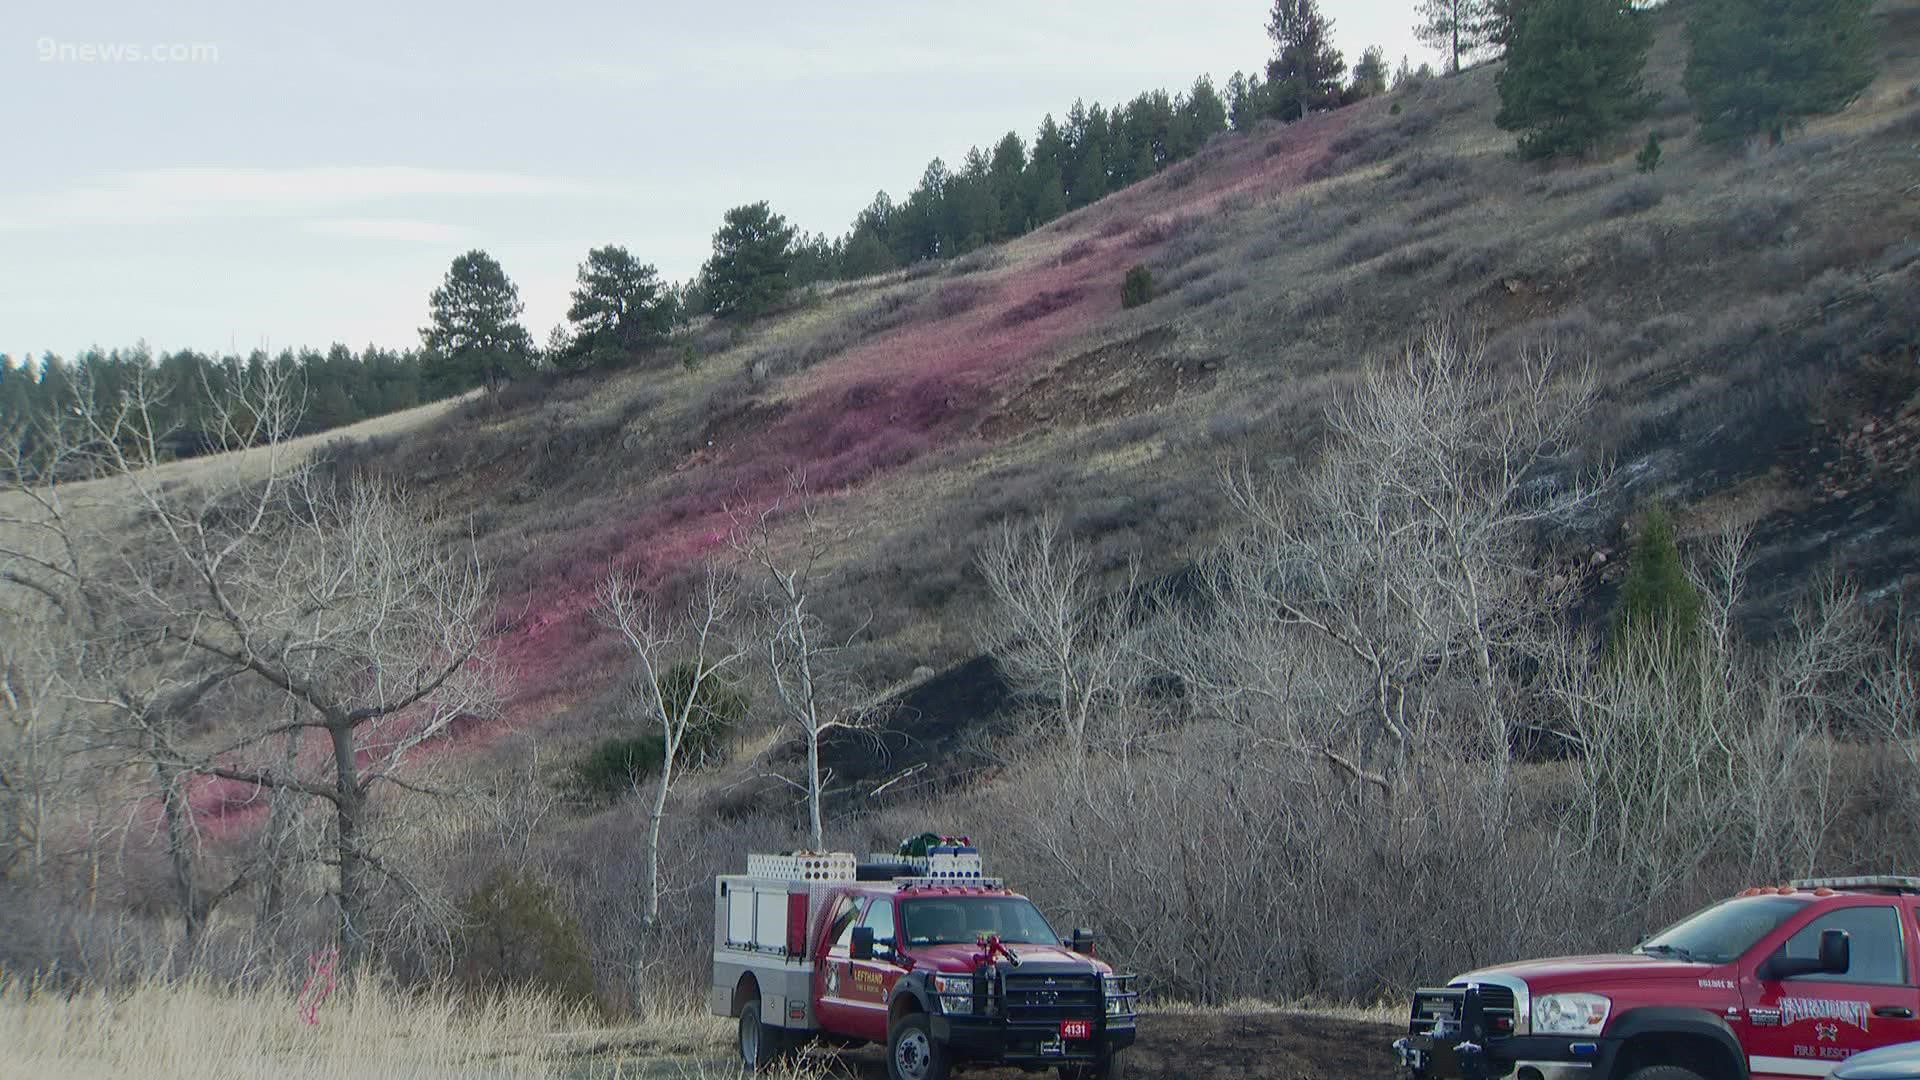 On Monday, the Boulder County Sheriff's Office said the investigation into the cause of the fire is still ongoing.